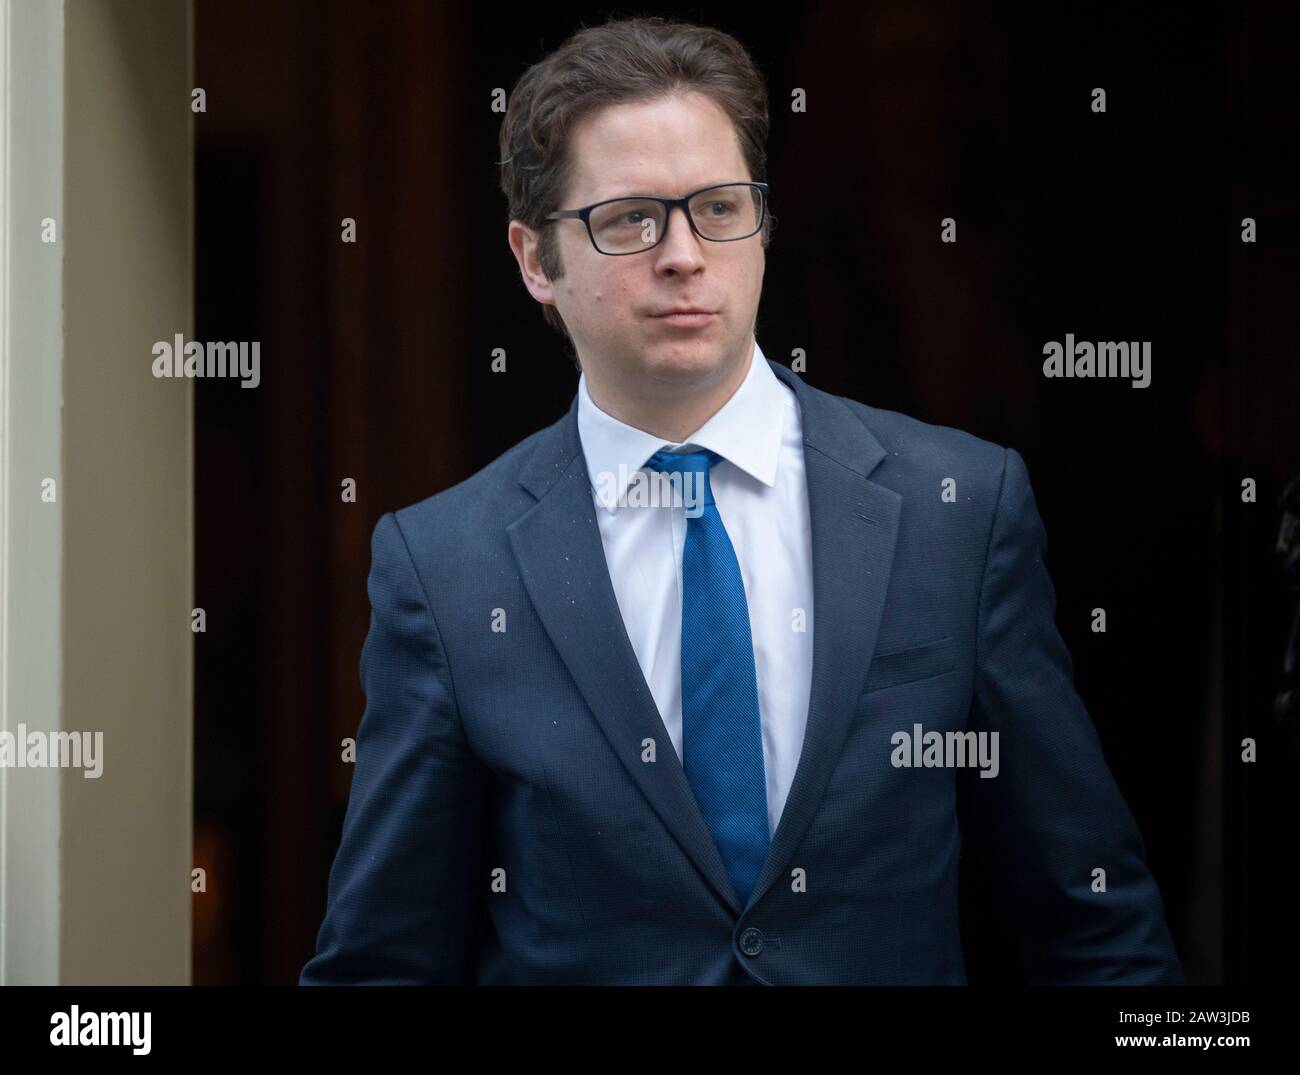 Downing Street, London, UK. 6th February 2020. Alex Burghart MP, PPS to Boris Johnson leaves 10 Downing Street after weekly cabinet meeting. Credit: Malcolm Park/Alamy Live News. Stock Photo